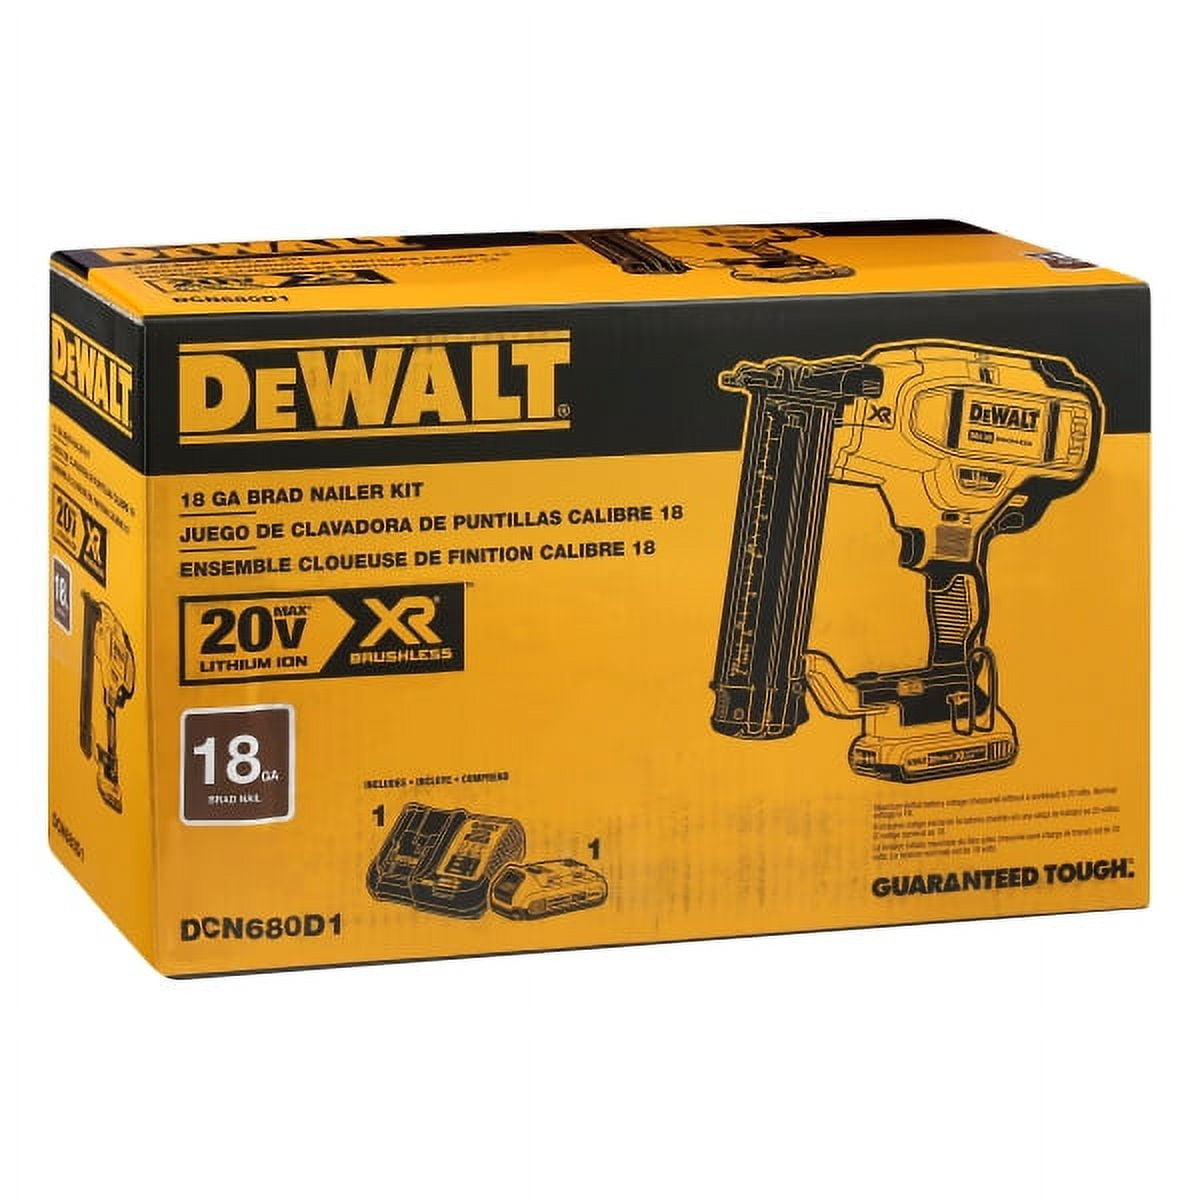 DEWALT 20V MAX XR Lithium-Ion Cordless 15-Gauge Finish Nailer Kit and 2 in.  x 15-Gauge Angled Finish Nails (2500 Pieces) DCN650D1W200-2 - The Home Depot